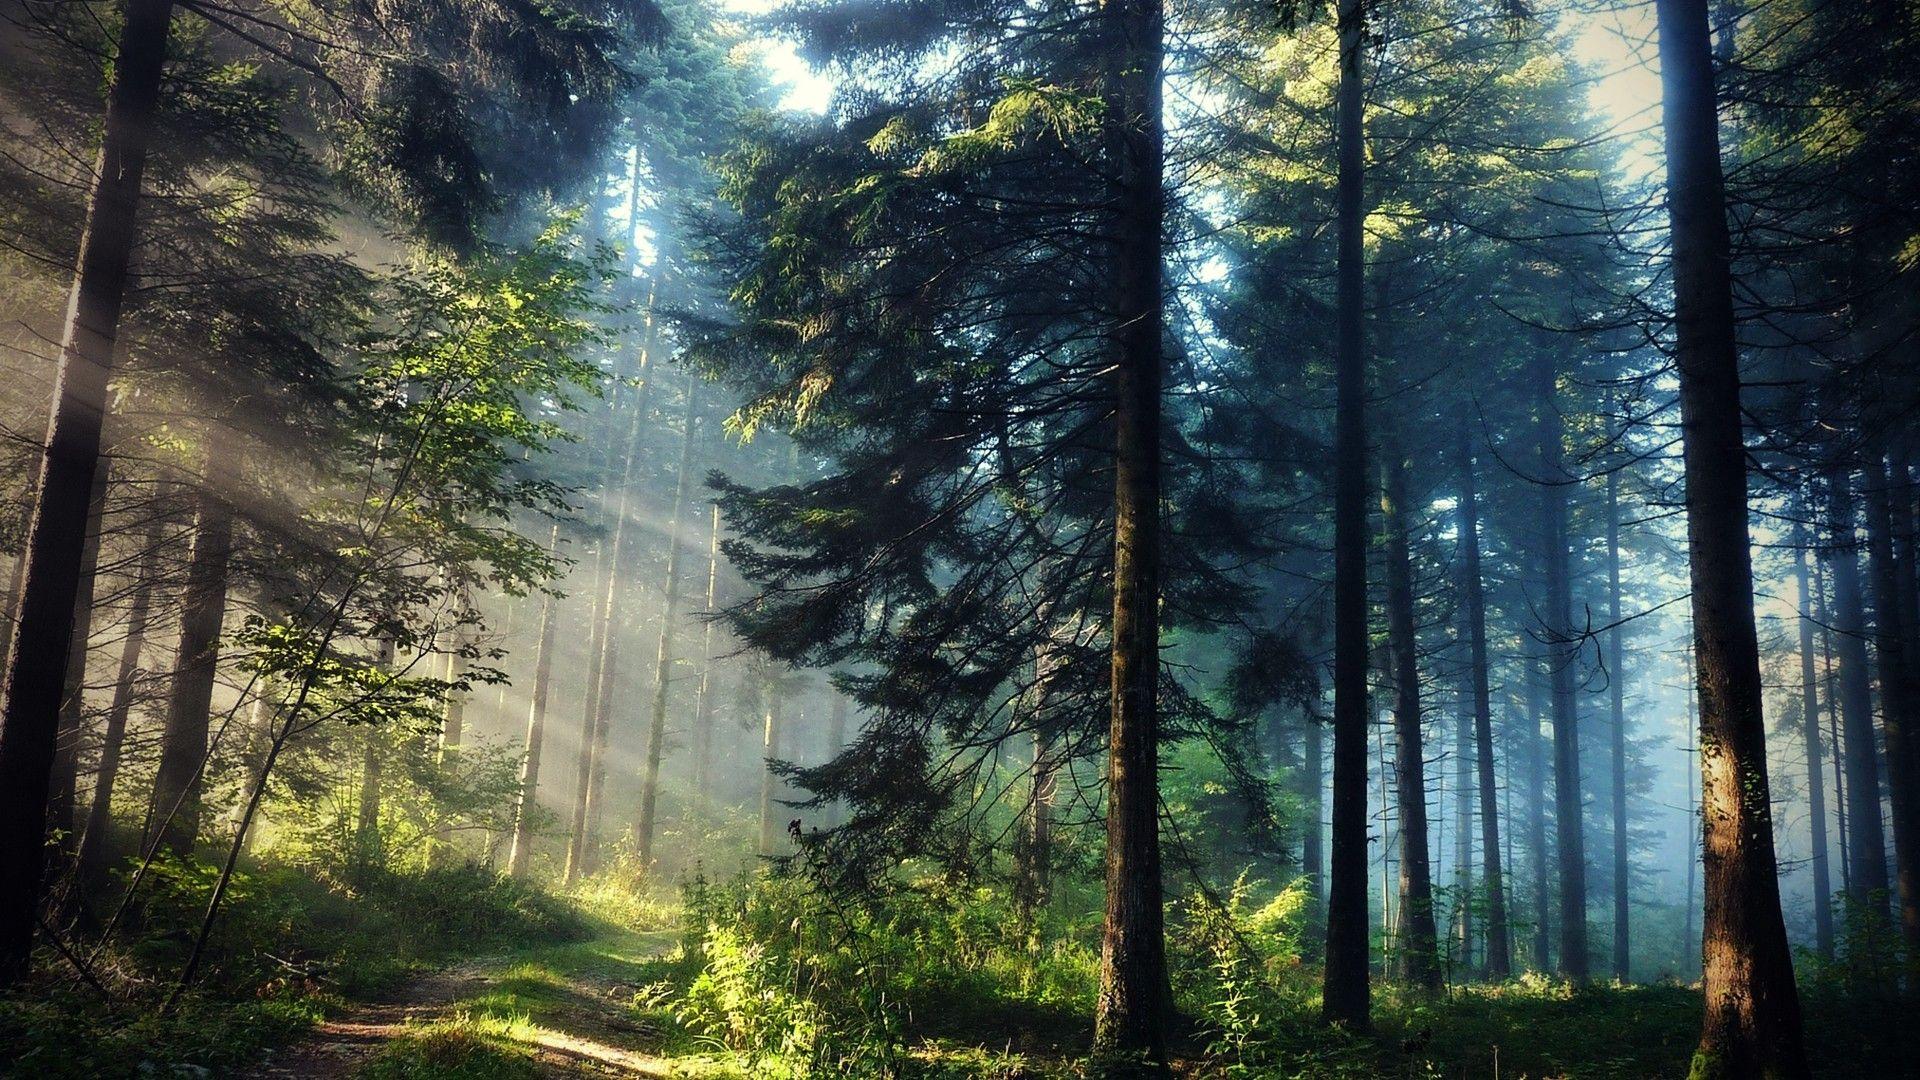 Sun ray through trees. Best Free HD Wallpaper of Nature. Forest wallpaper, Forest landscape, Beautiful forest